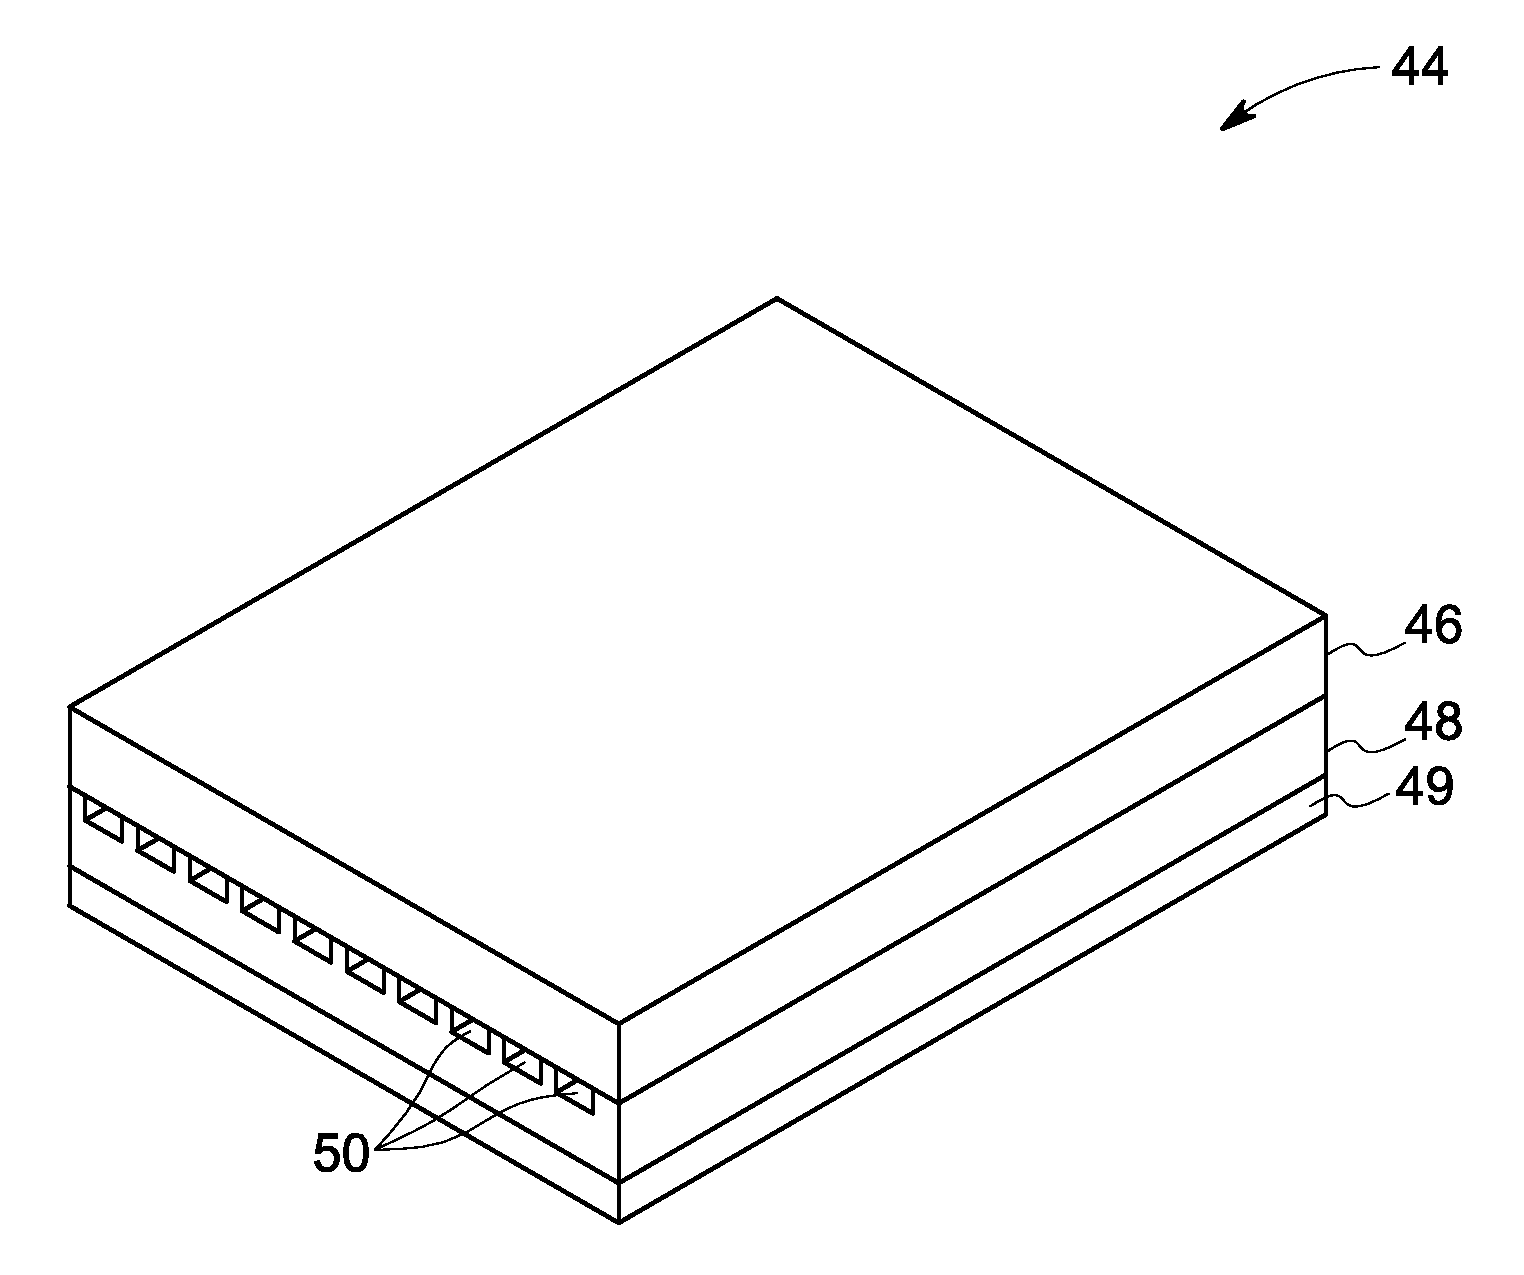 Fluidic thermal management article and method